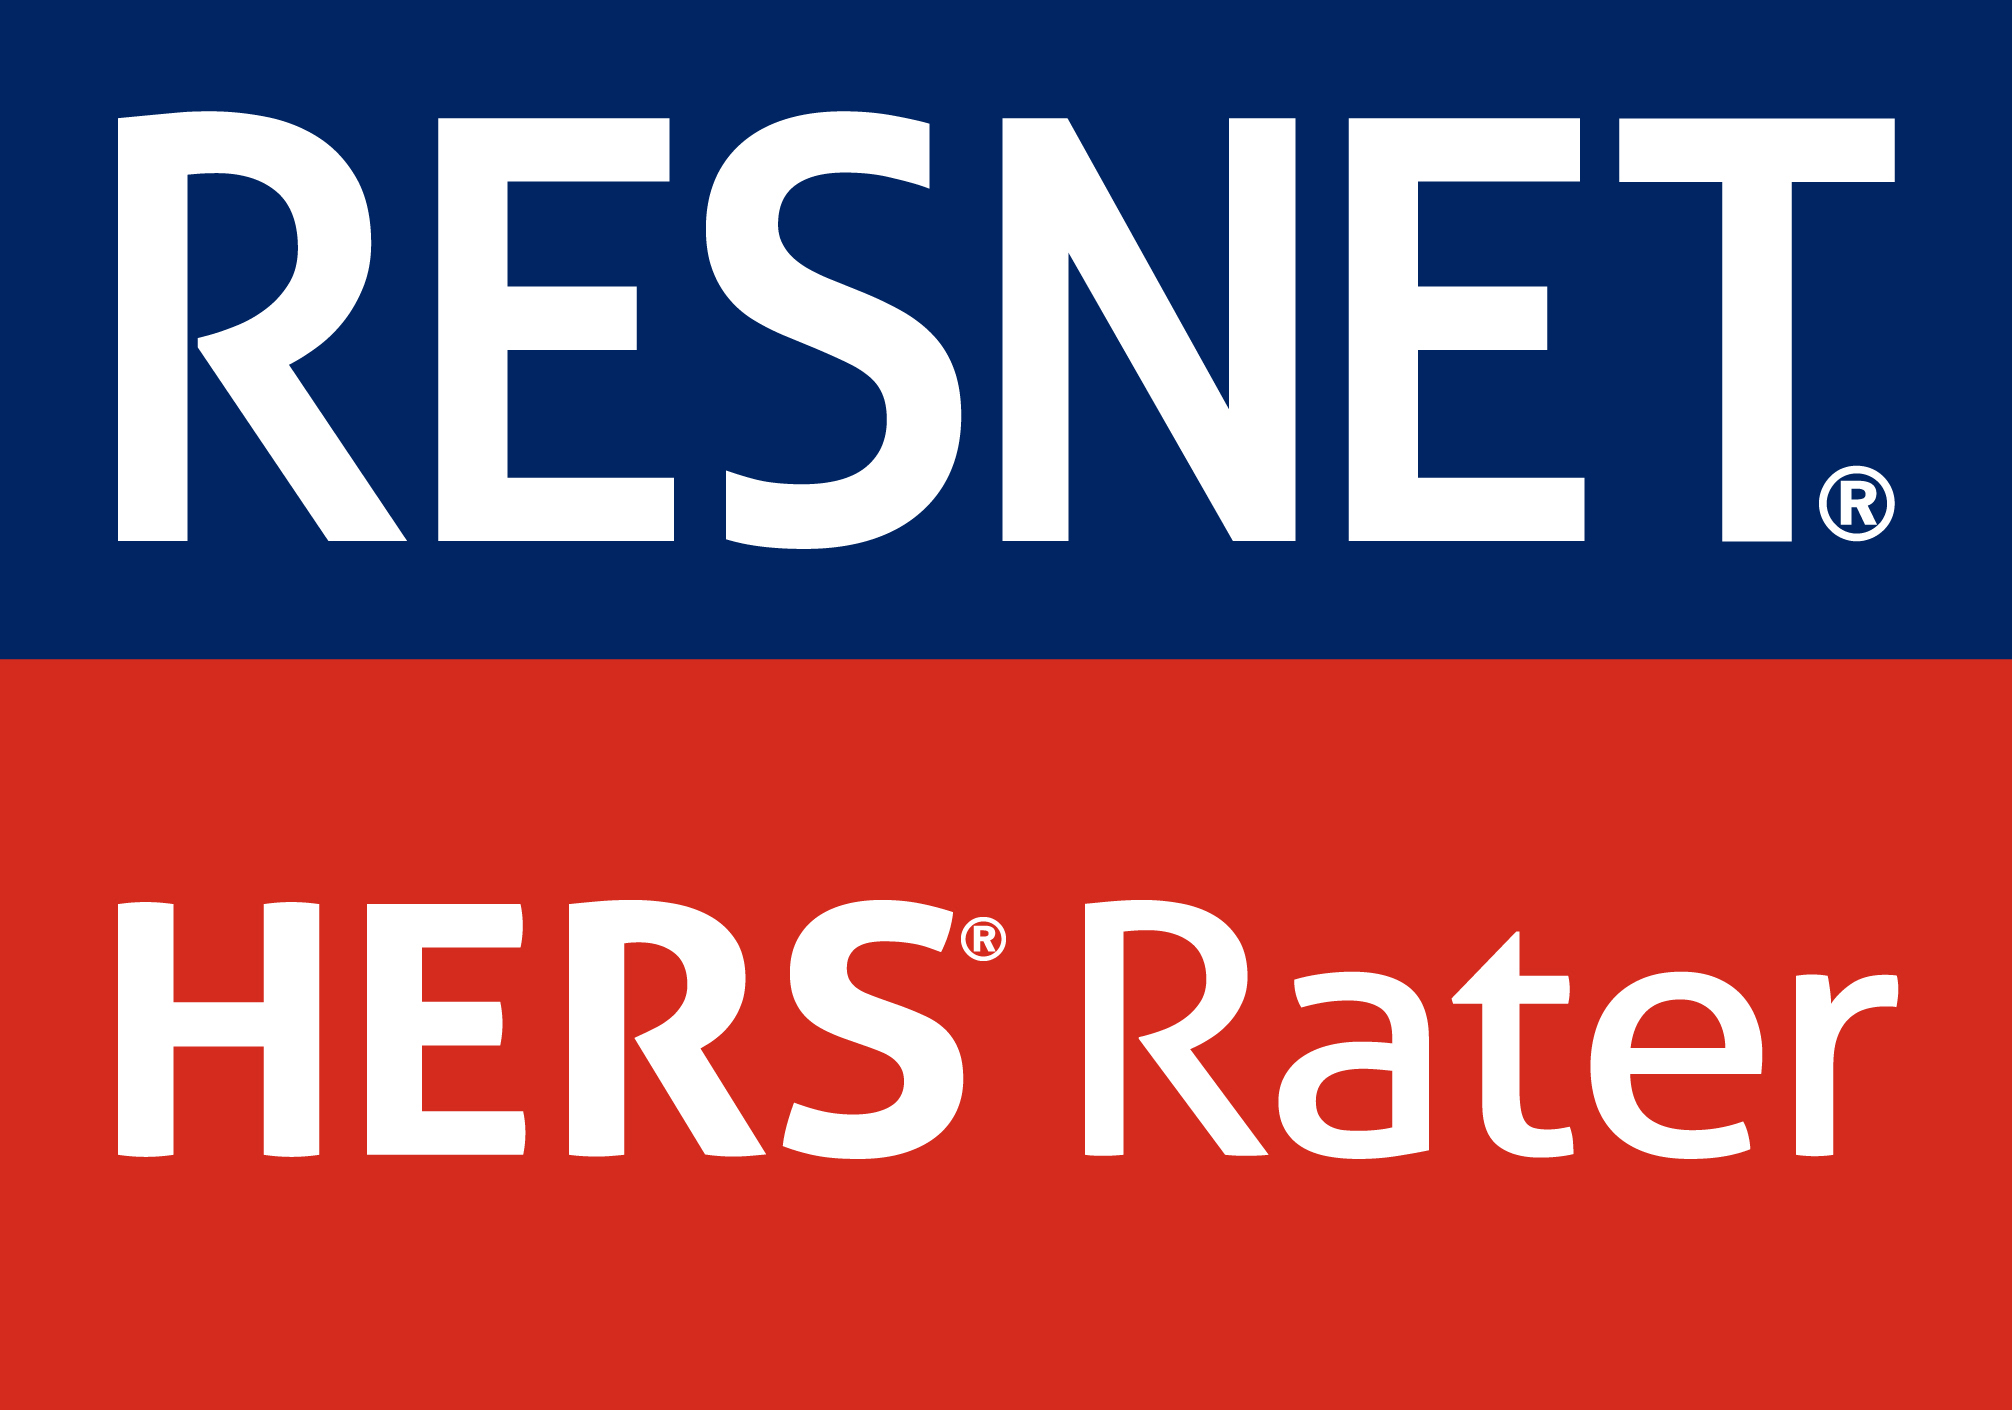 RESNET_HERS_Rater_Palm Beach Florida